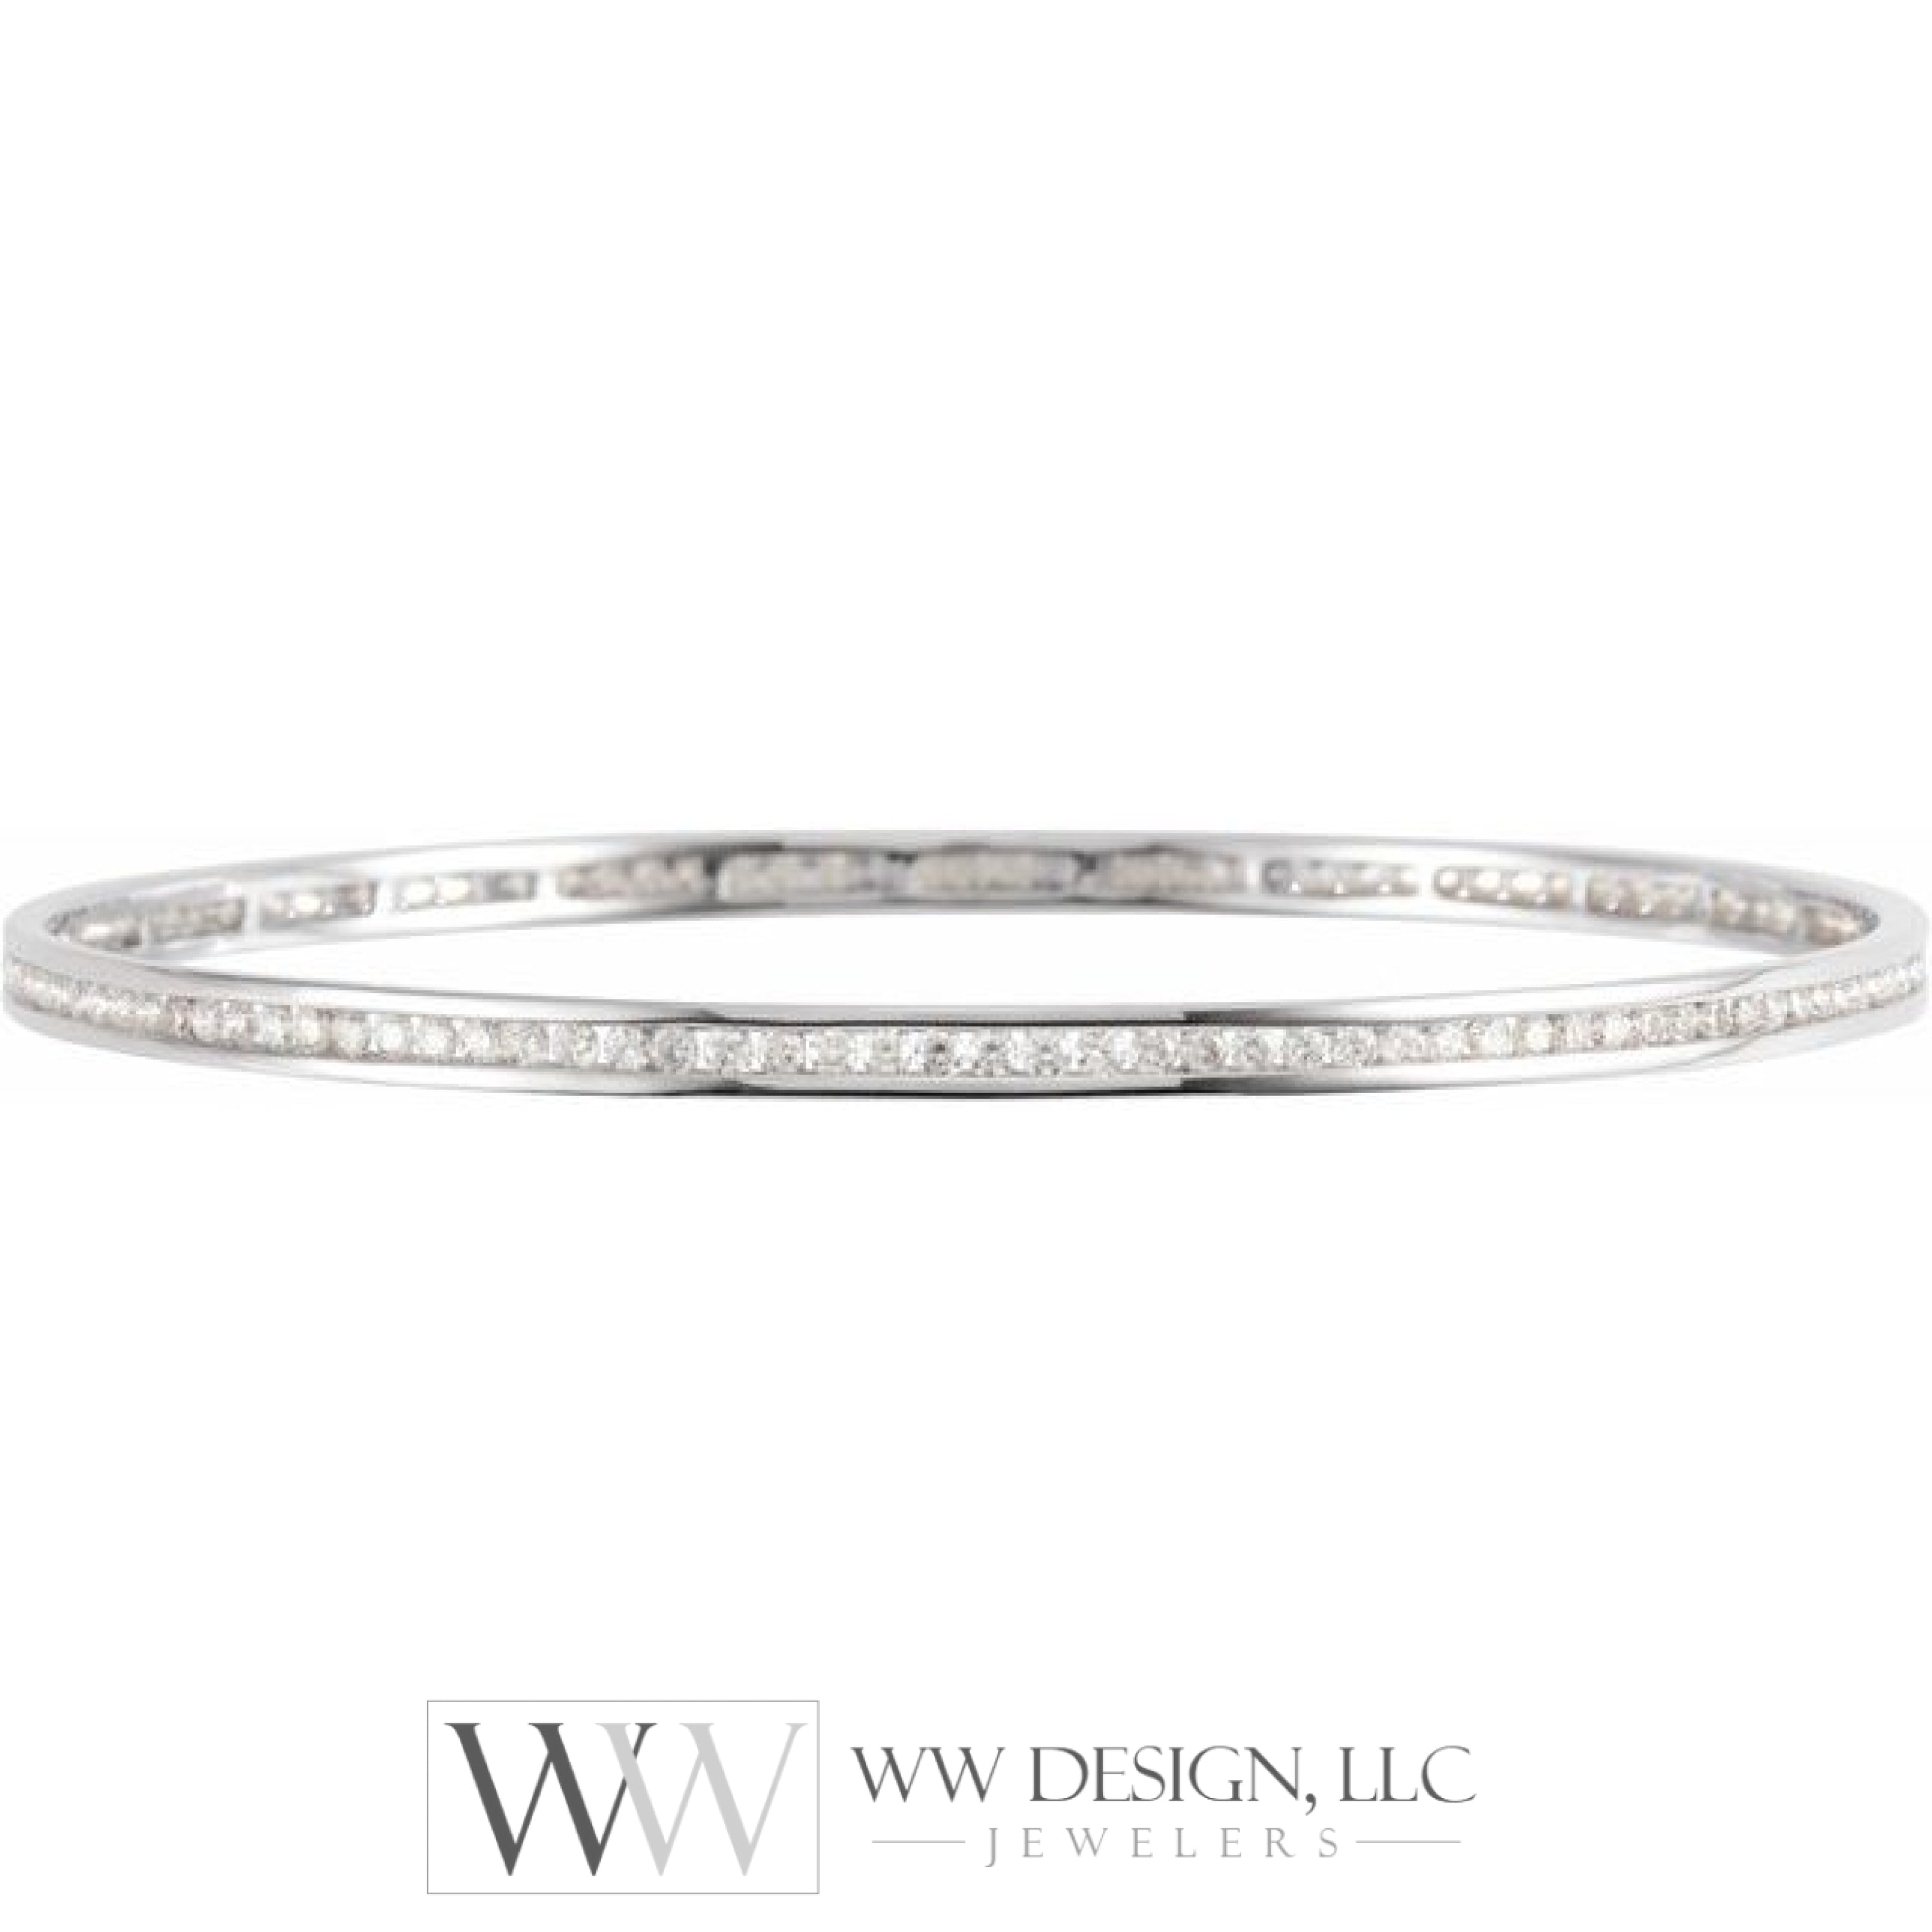 2.25 CTW or 1.5 CTW Natural Diamond Stackable Bangle 8" Bracelet - 14k Gold (Yellow, White or Rose) wwdesignjewelers.com